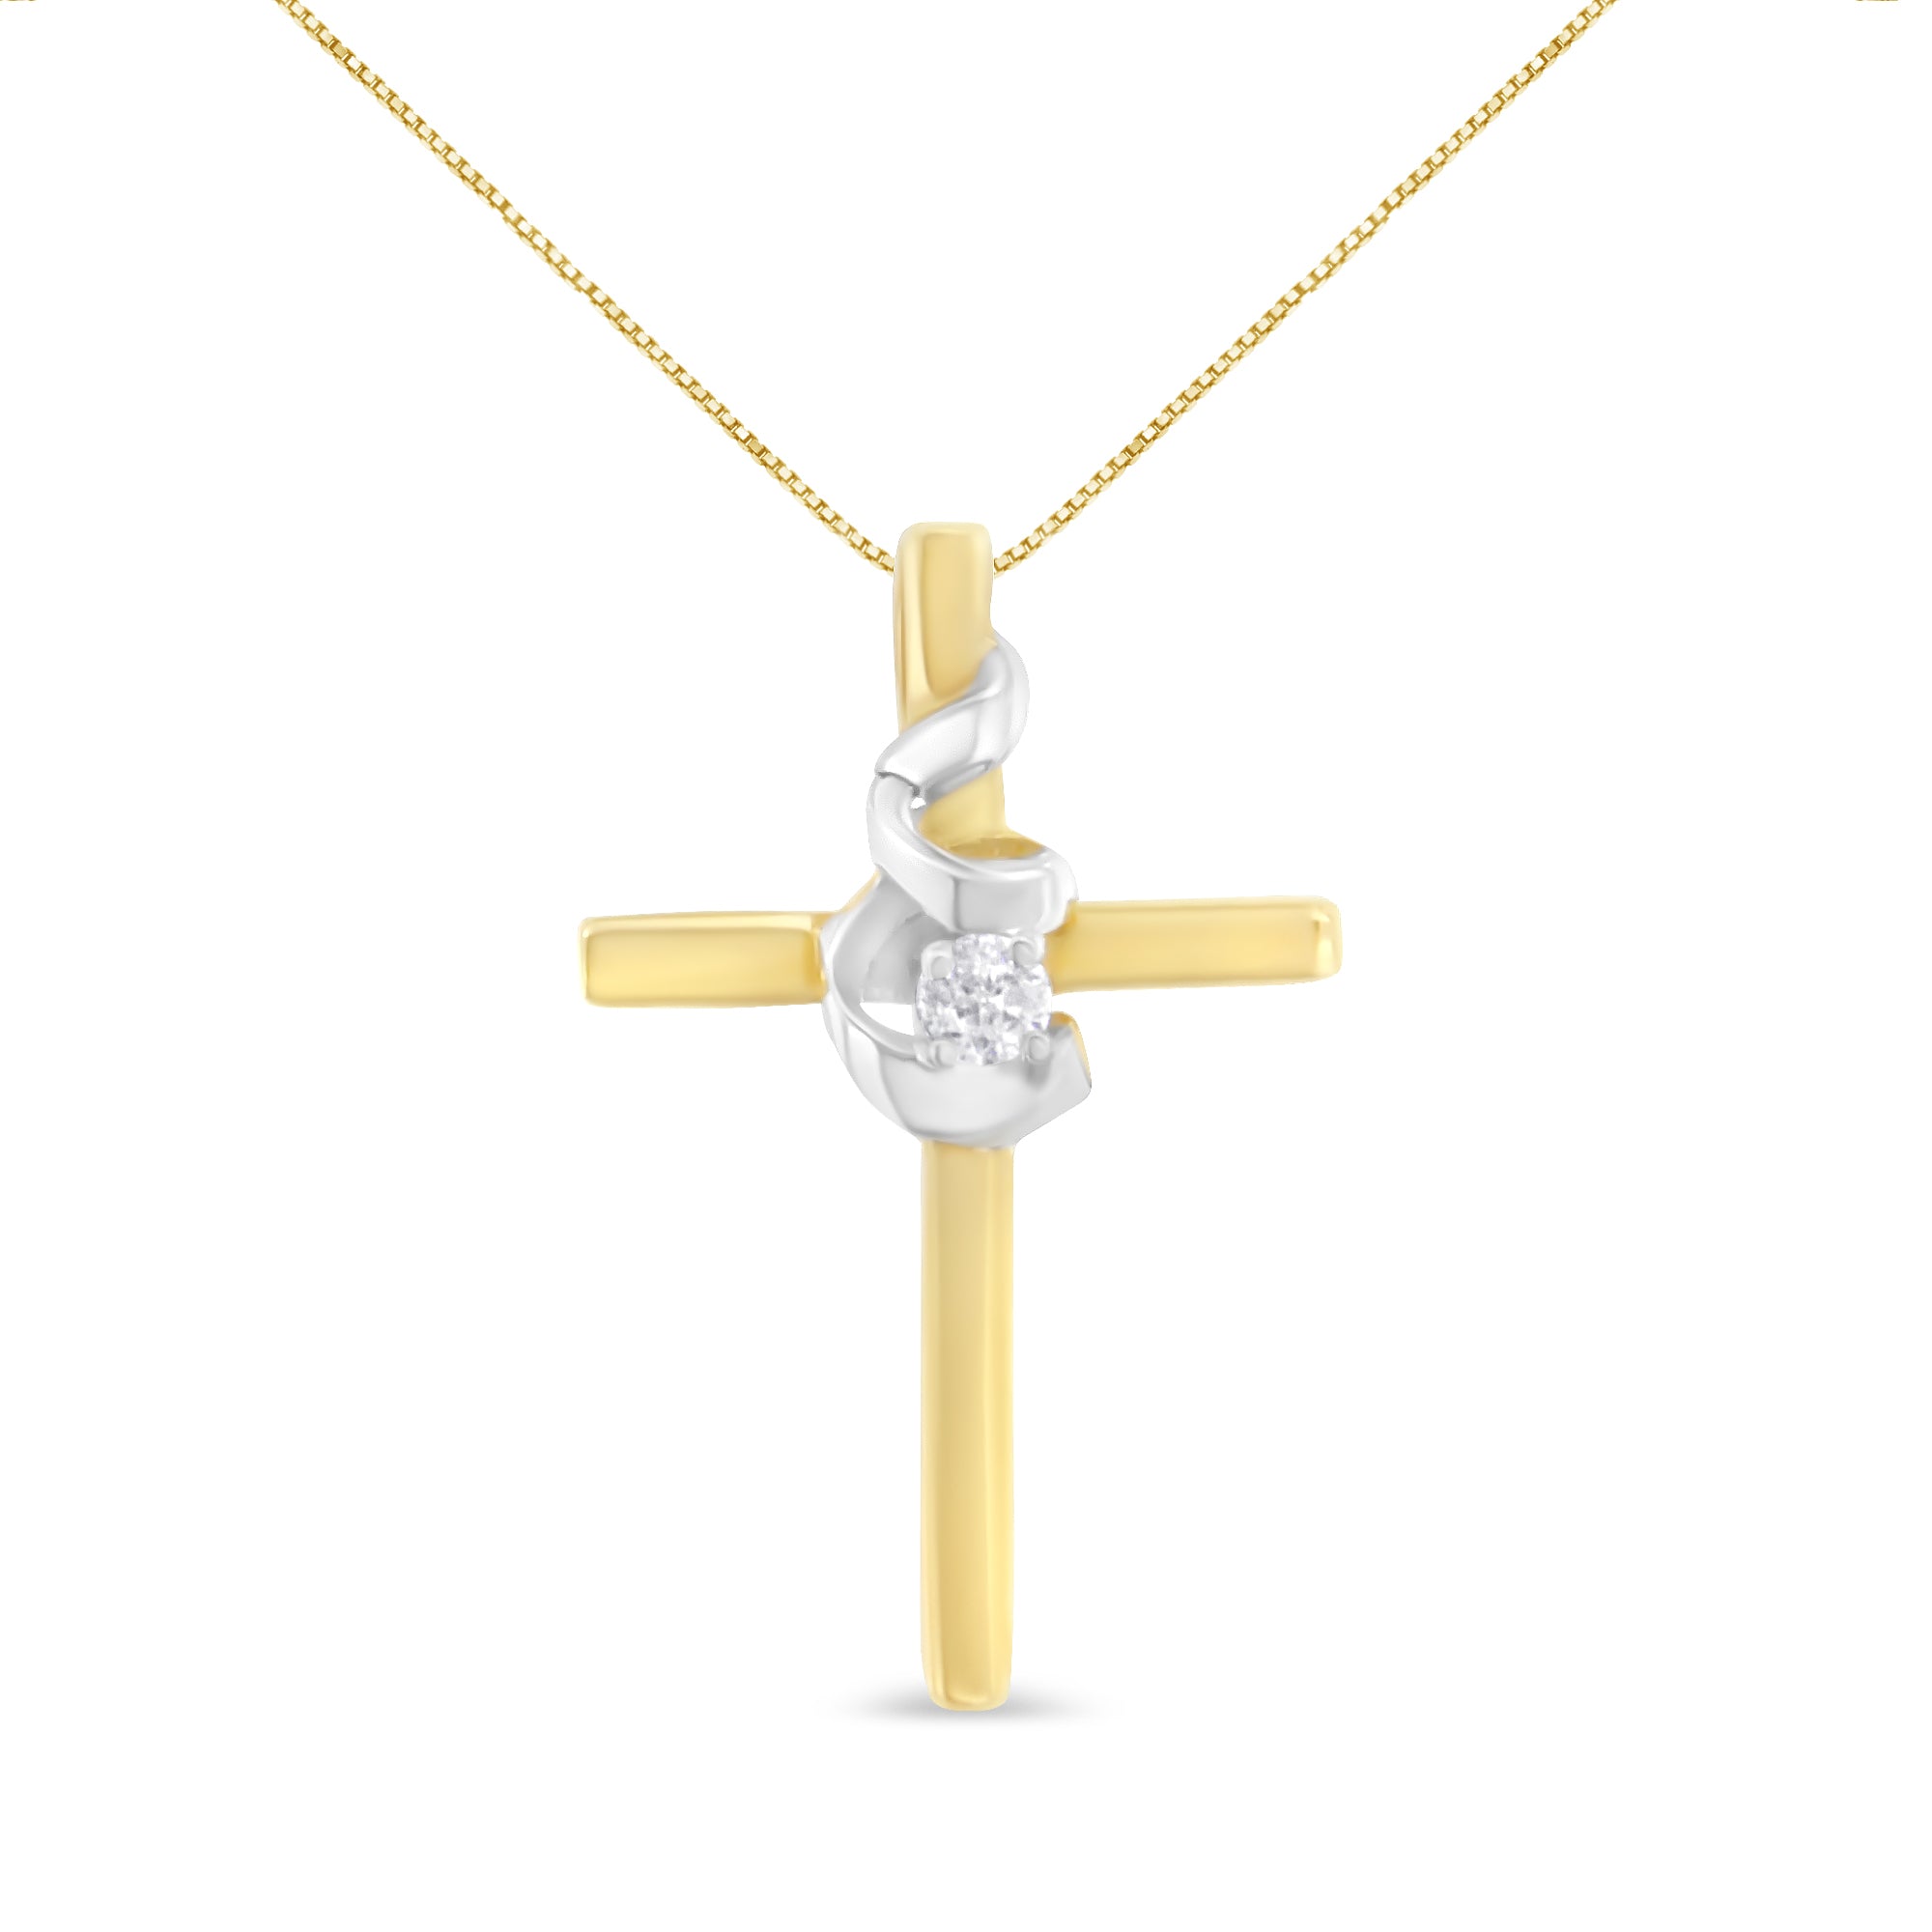 Espira 10K Two-Tone Yellow & White Gold Diamond-Accented Spiral & Cross 18" Pendant Necklace (J-K Color, I2-I3 Clarity)-1